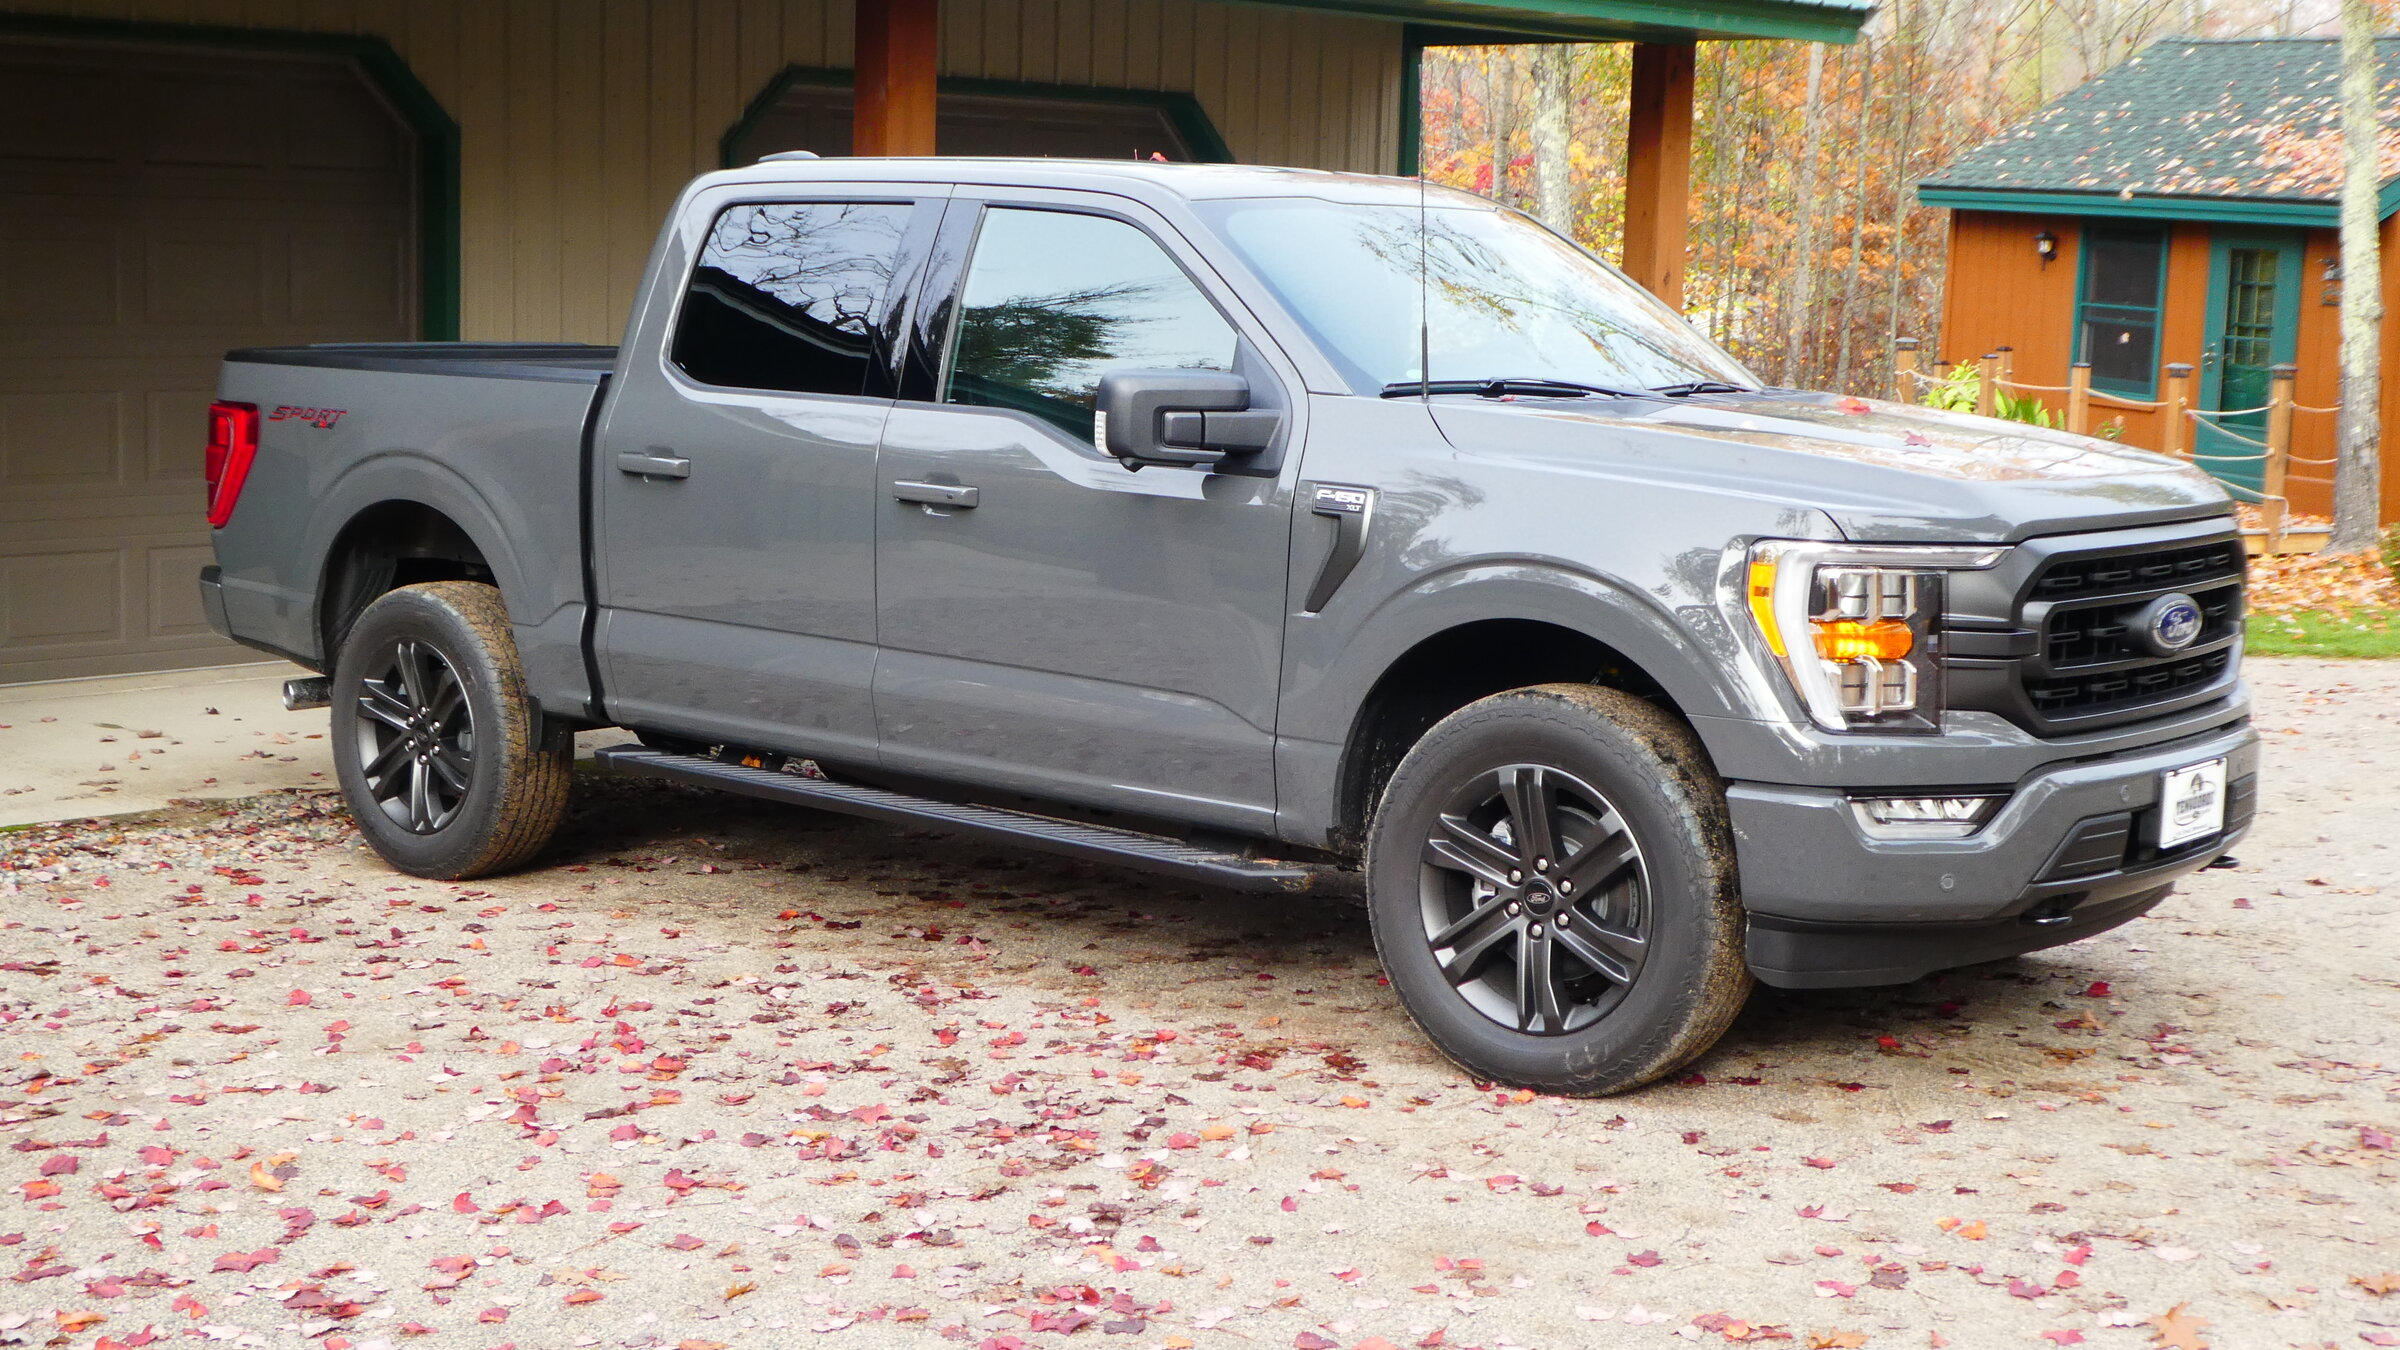 Ford F-150 "Old to New"- What did you drive before purchasing 4FD8391B-C837-4C61-87EA-56CF652CEA39